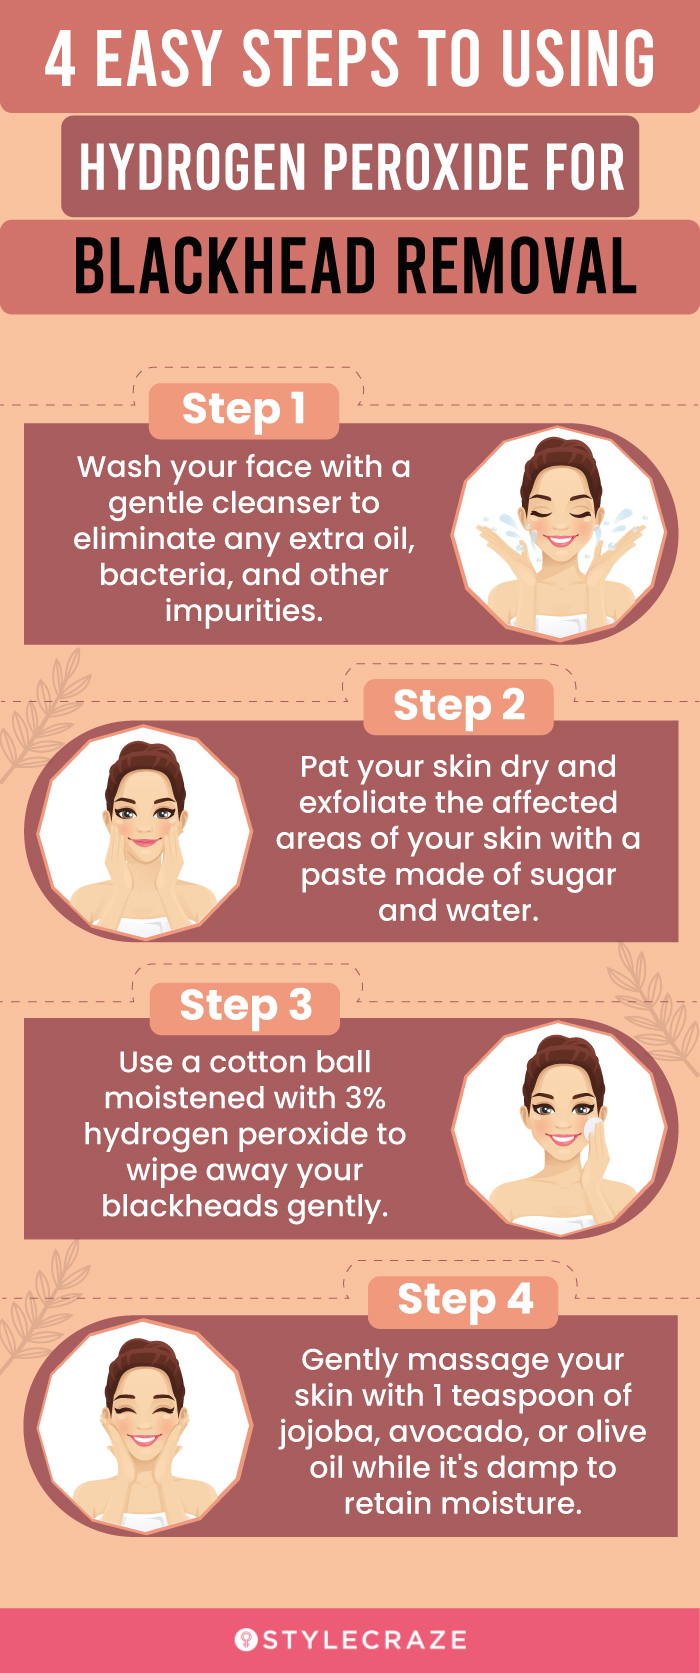 4 easy steps to using hydrogen peroxide for blackhead removal [infographic]